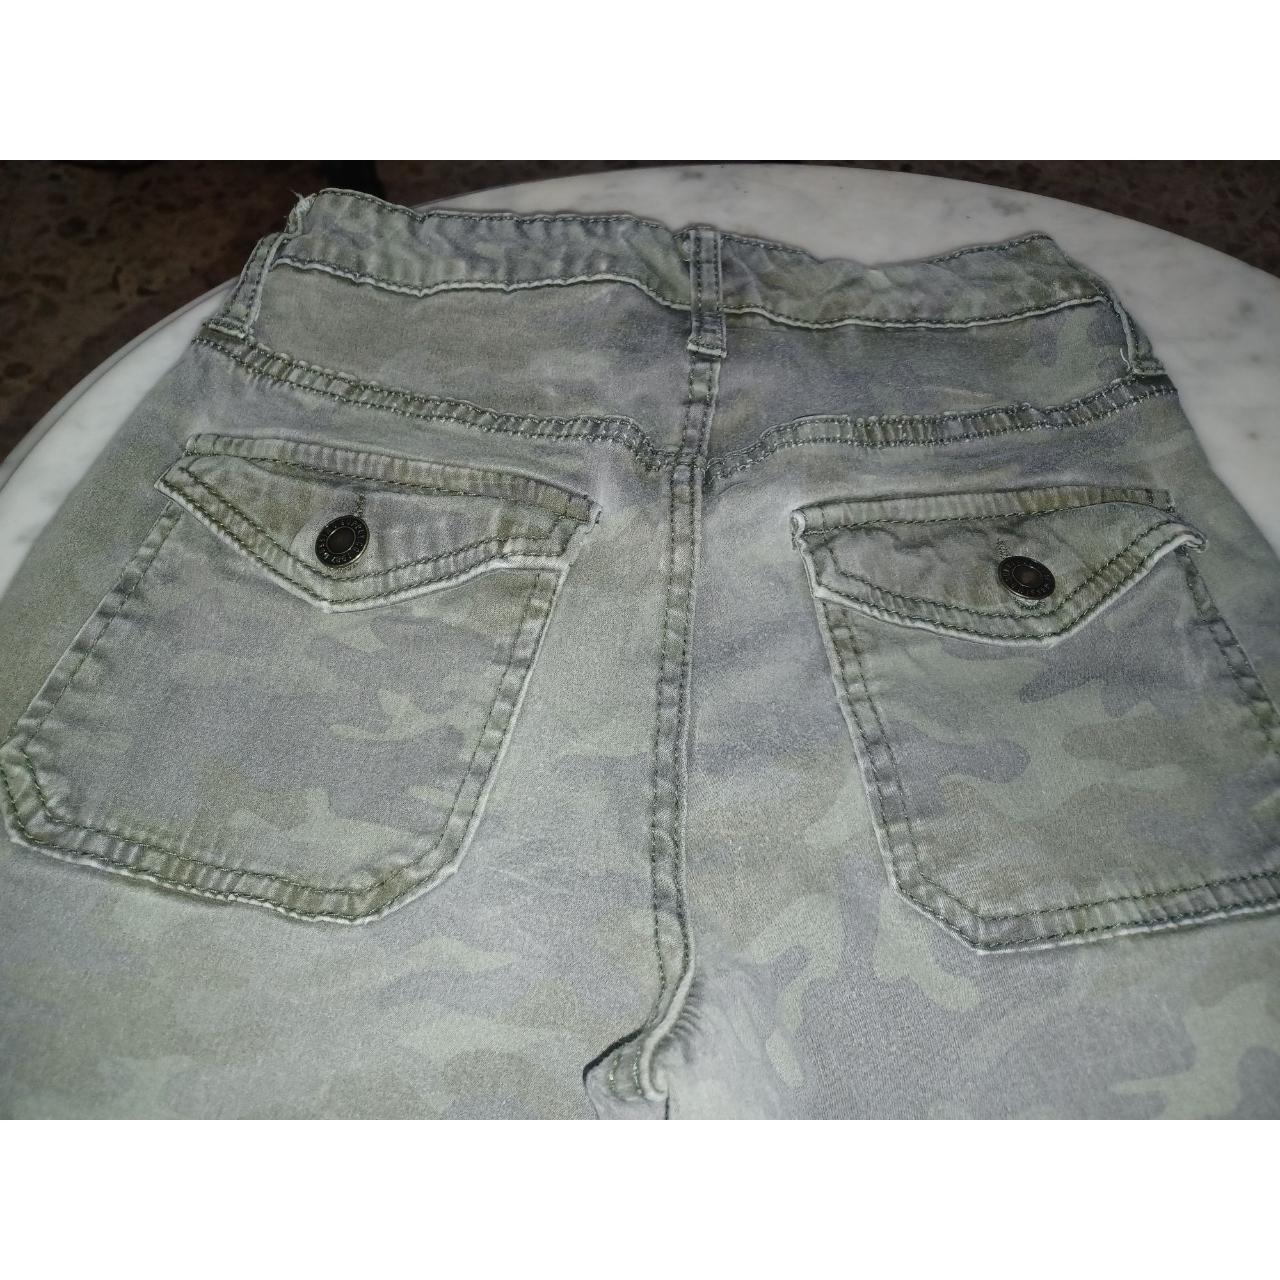 Mossimo Supply Co. Ladies Camo Skinny Jeans Jeggings - Depop